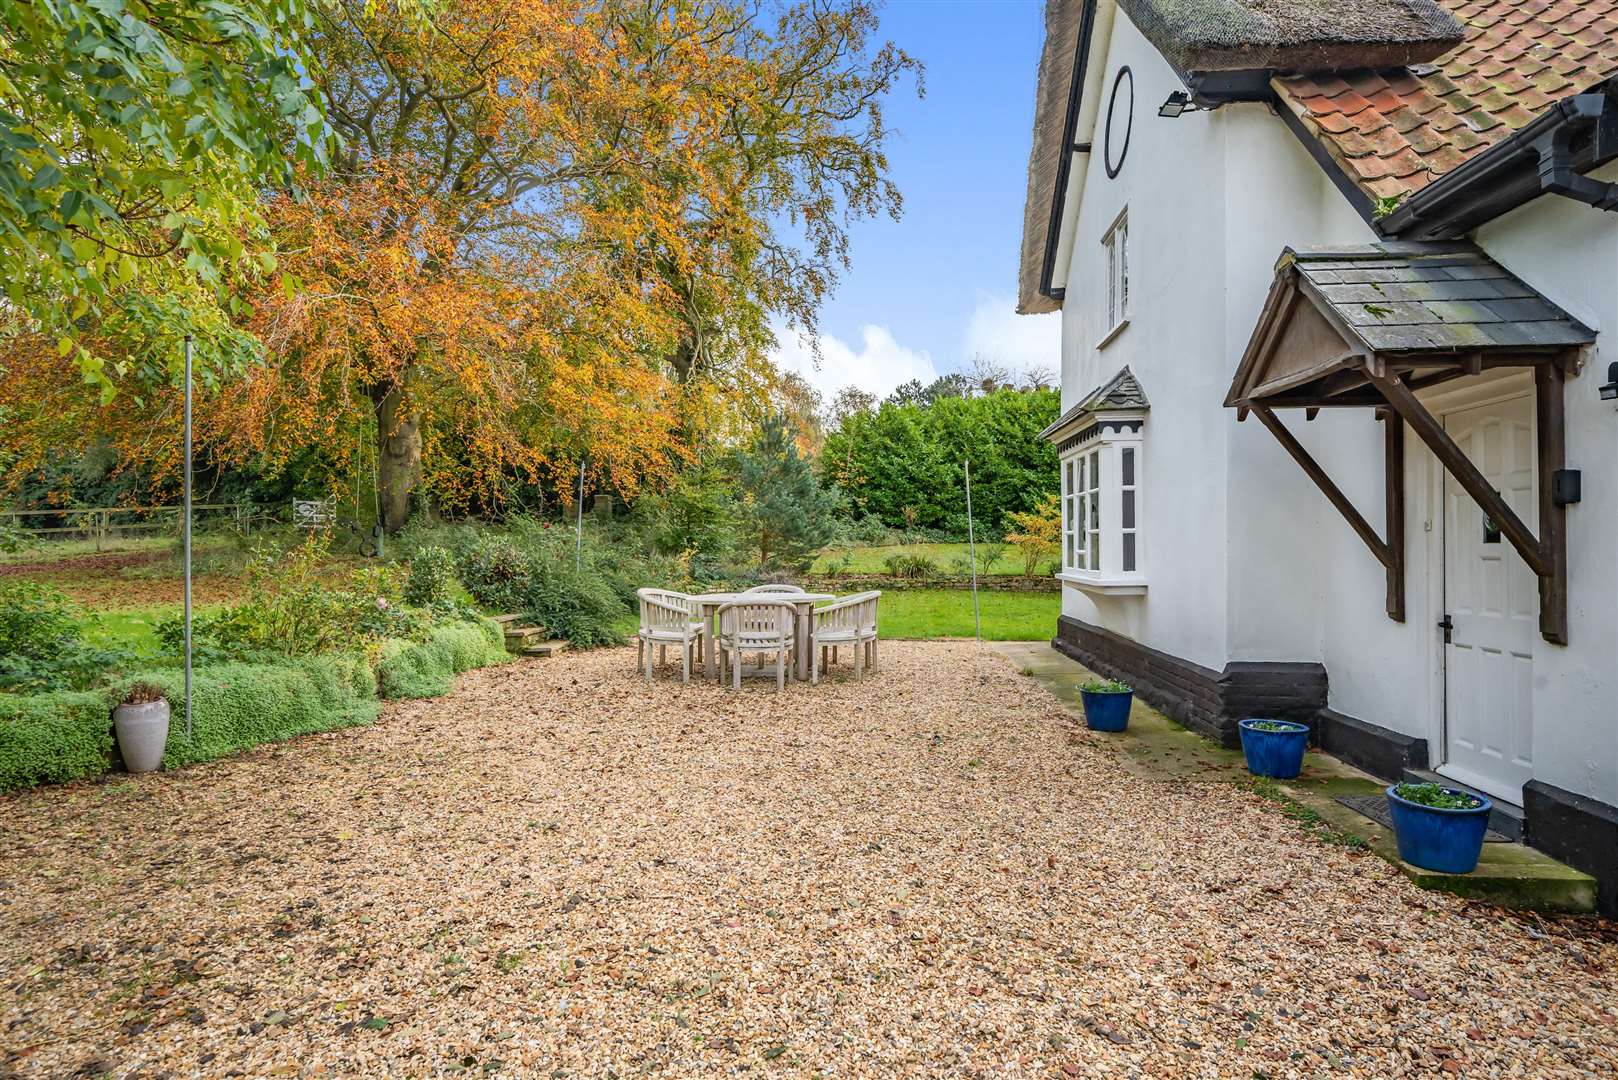 The period home is now on sale with Savills with a guide price of £800,000